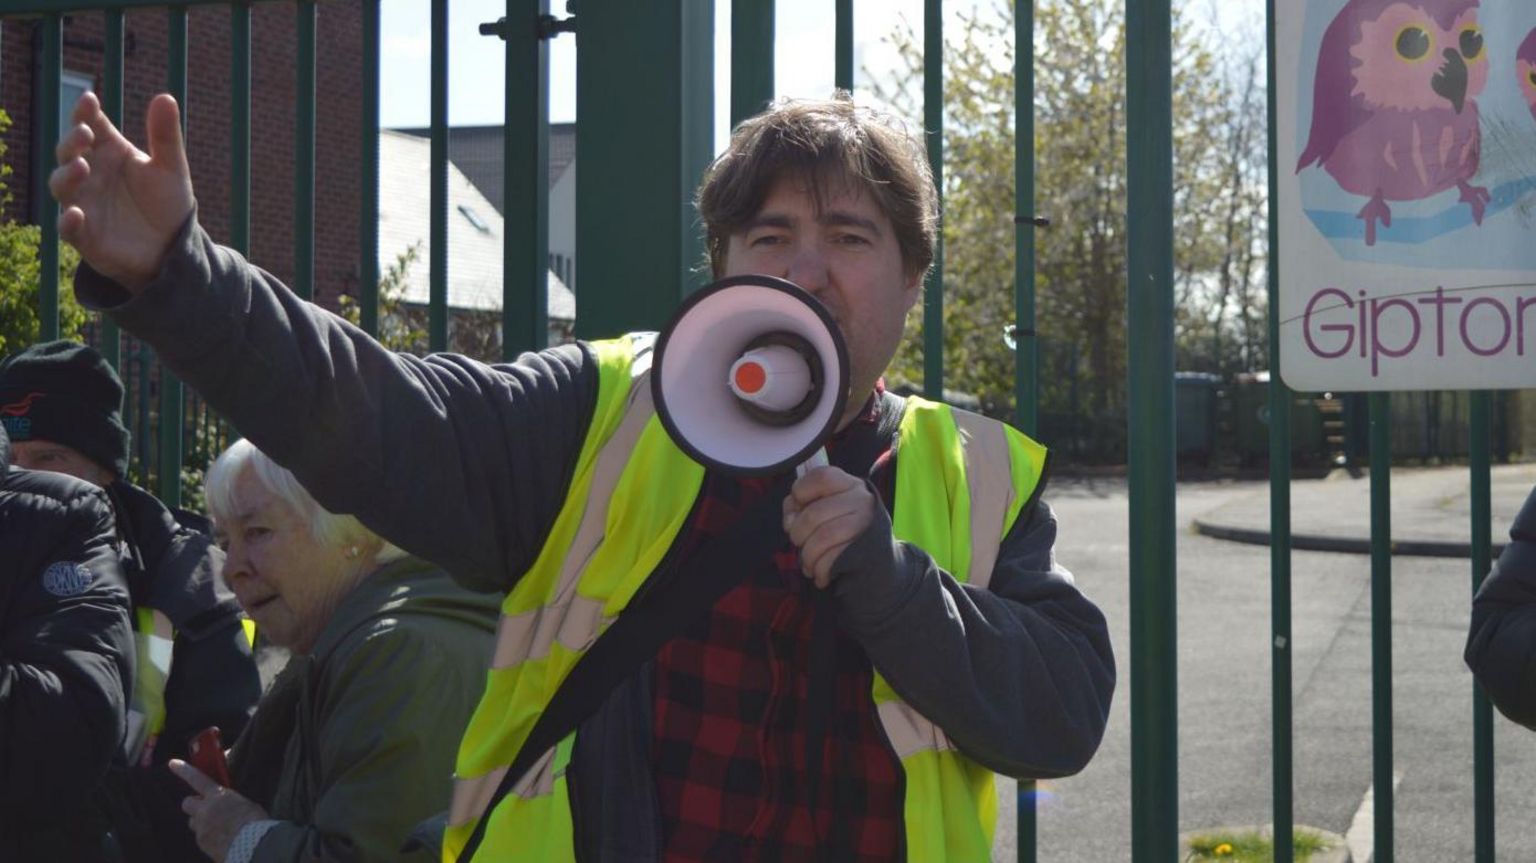 Campaigner Iain Dalton with a megaphone at a Save Little Owls nurseries protest